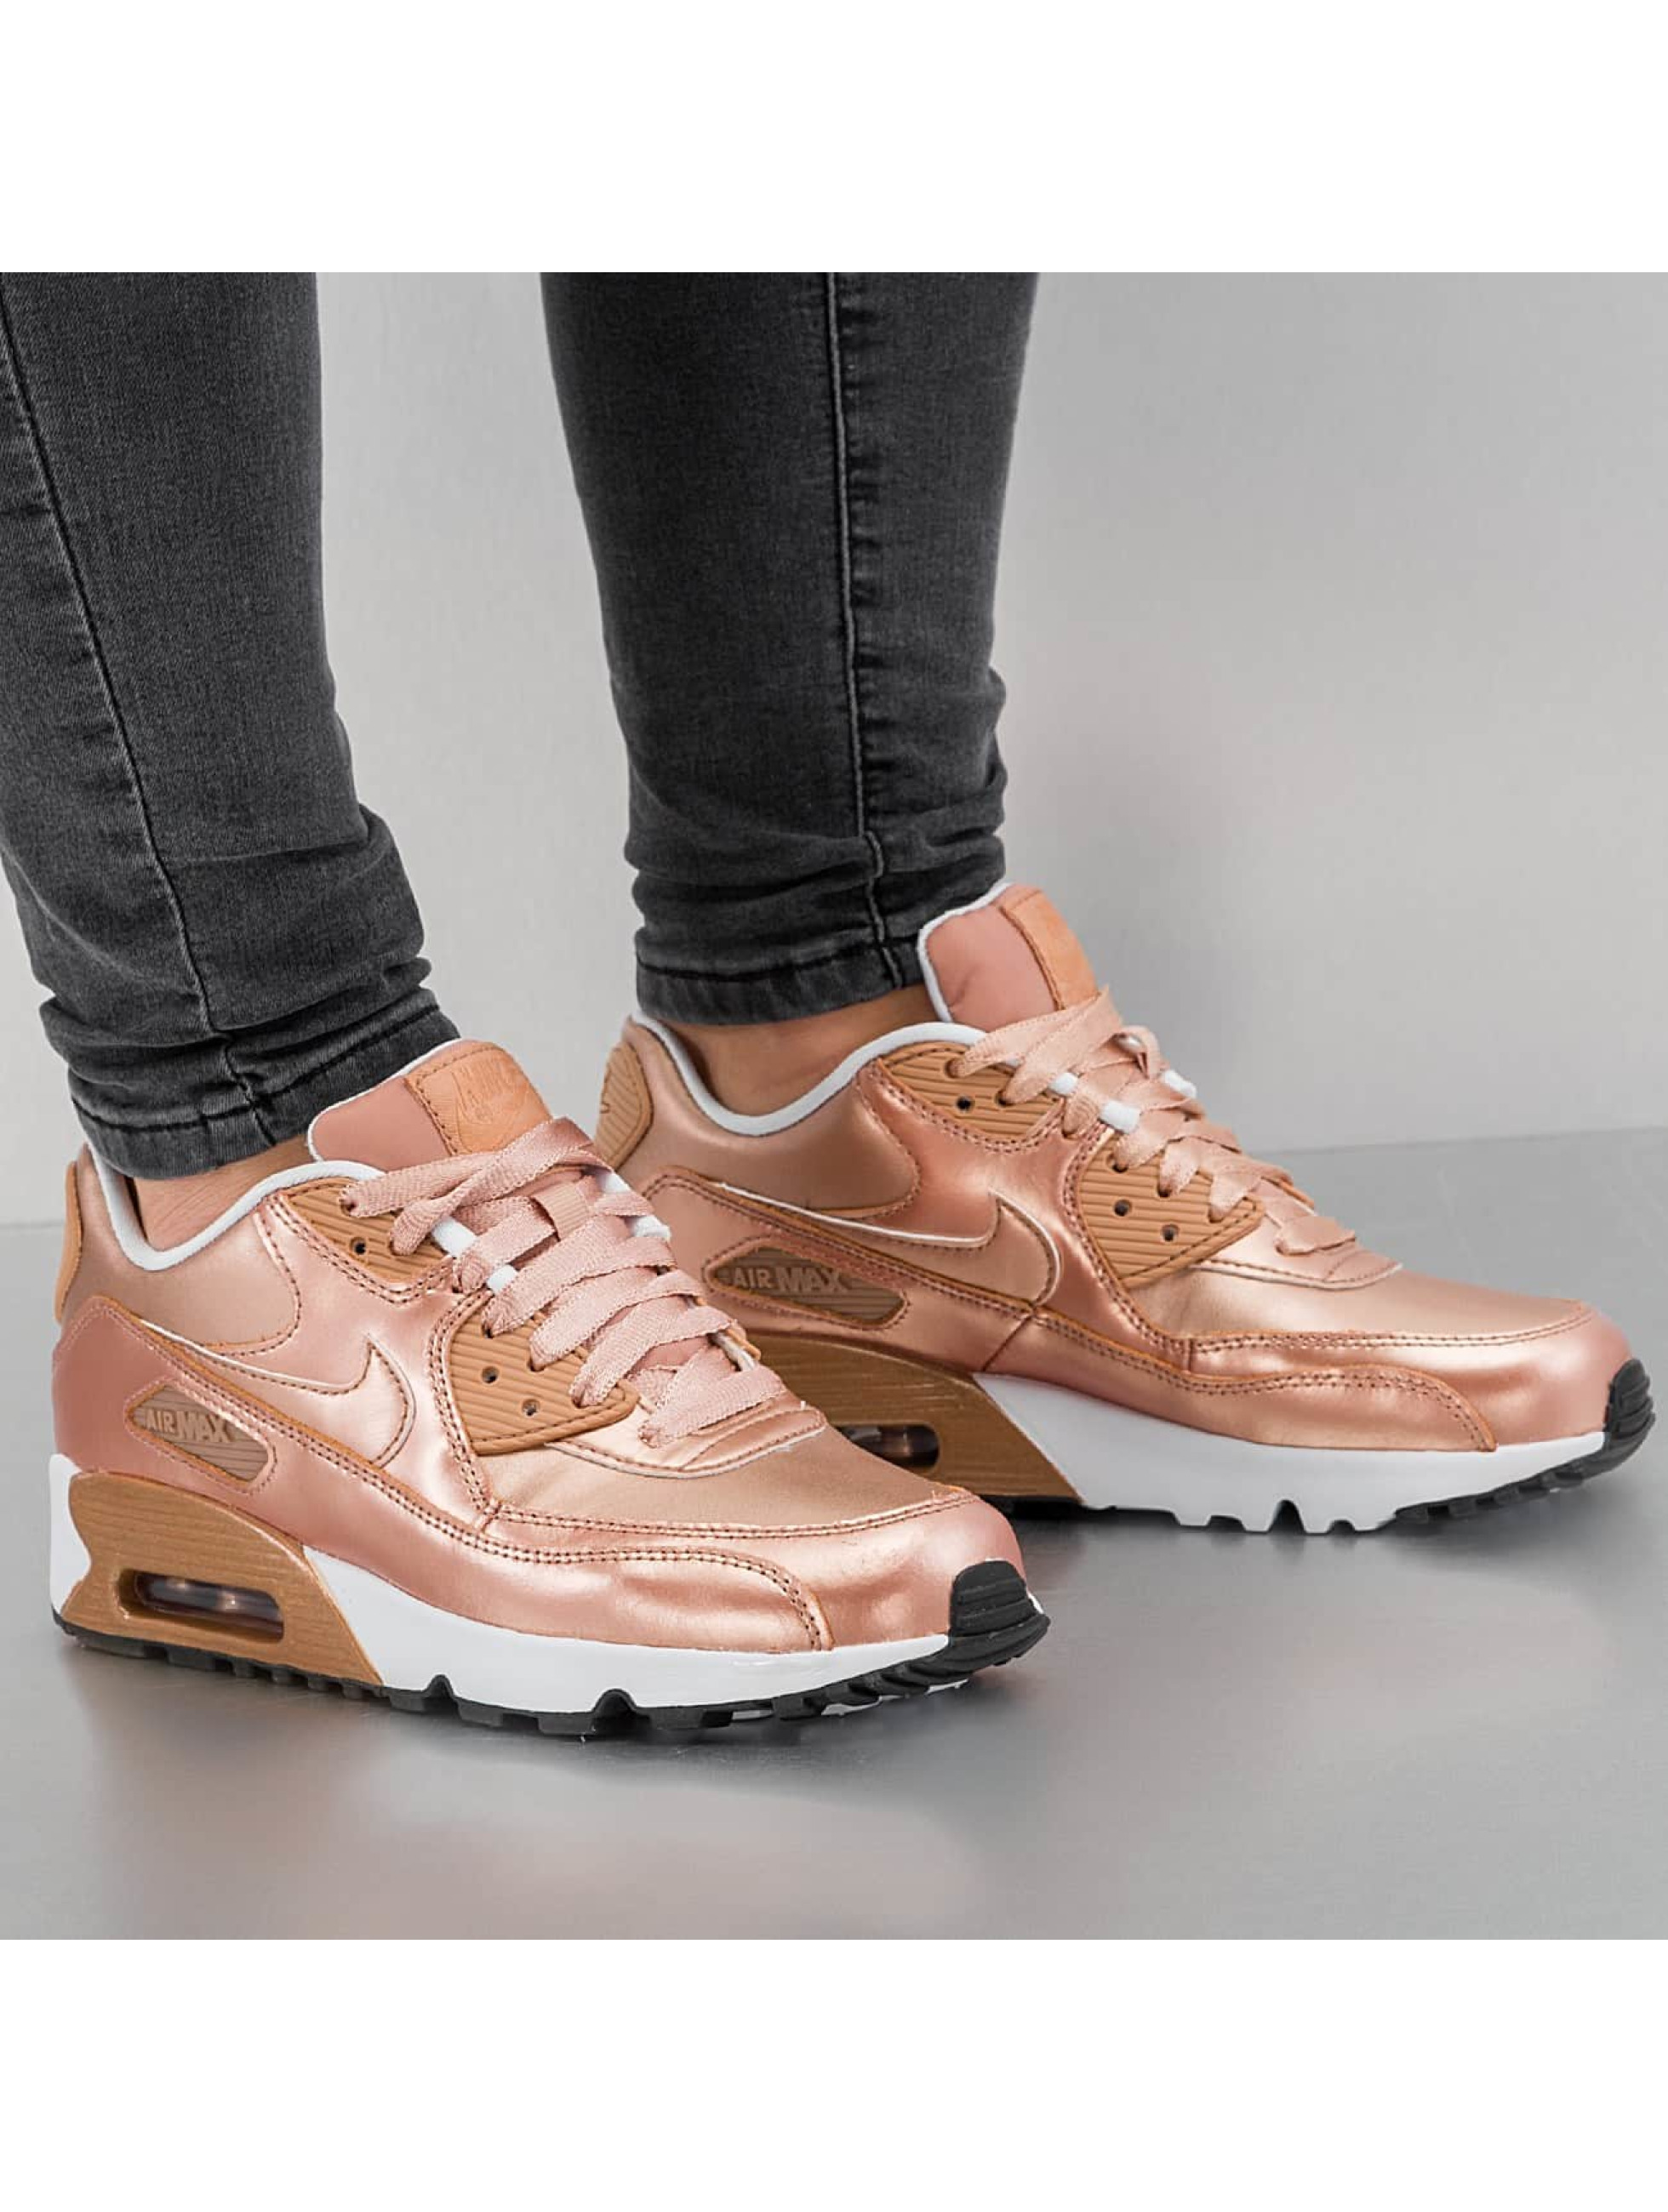 Nike schoen / sneaker Air Max 90 SE Leather (GS) in rood